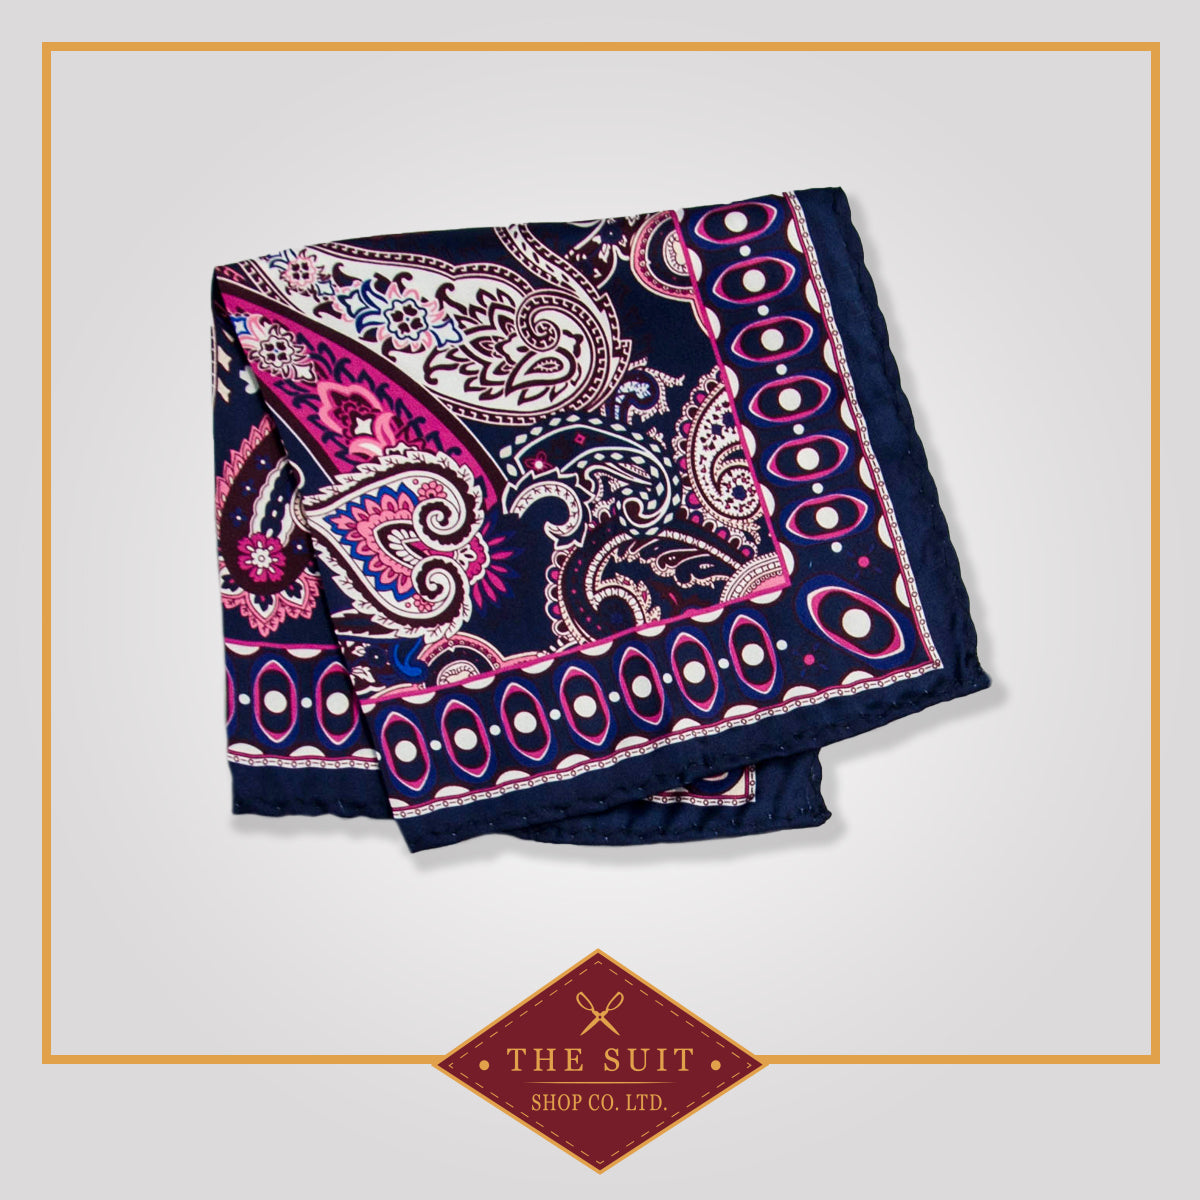 Tangaroa and Hibiscus Paisley Patterned Pocket Square